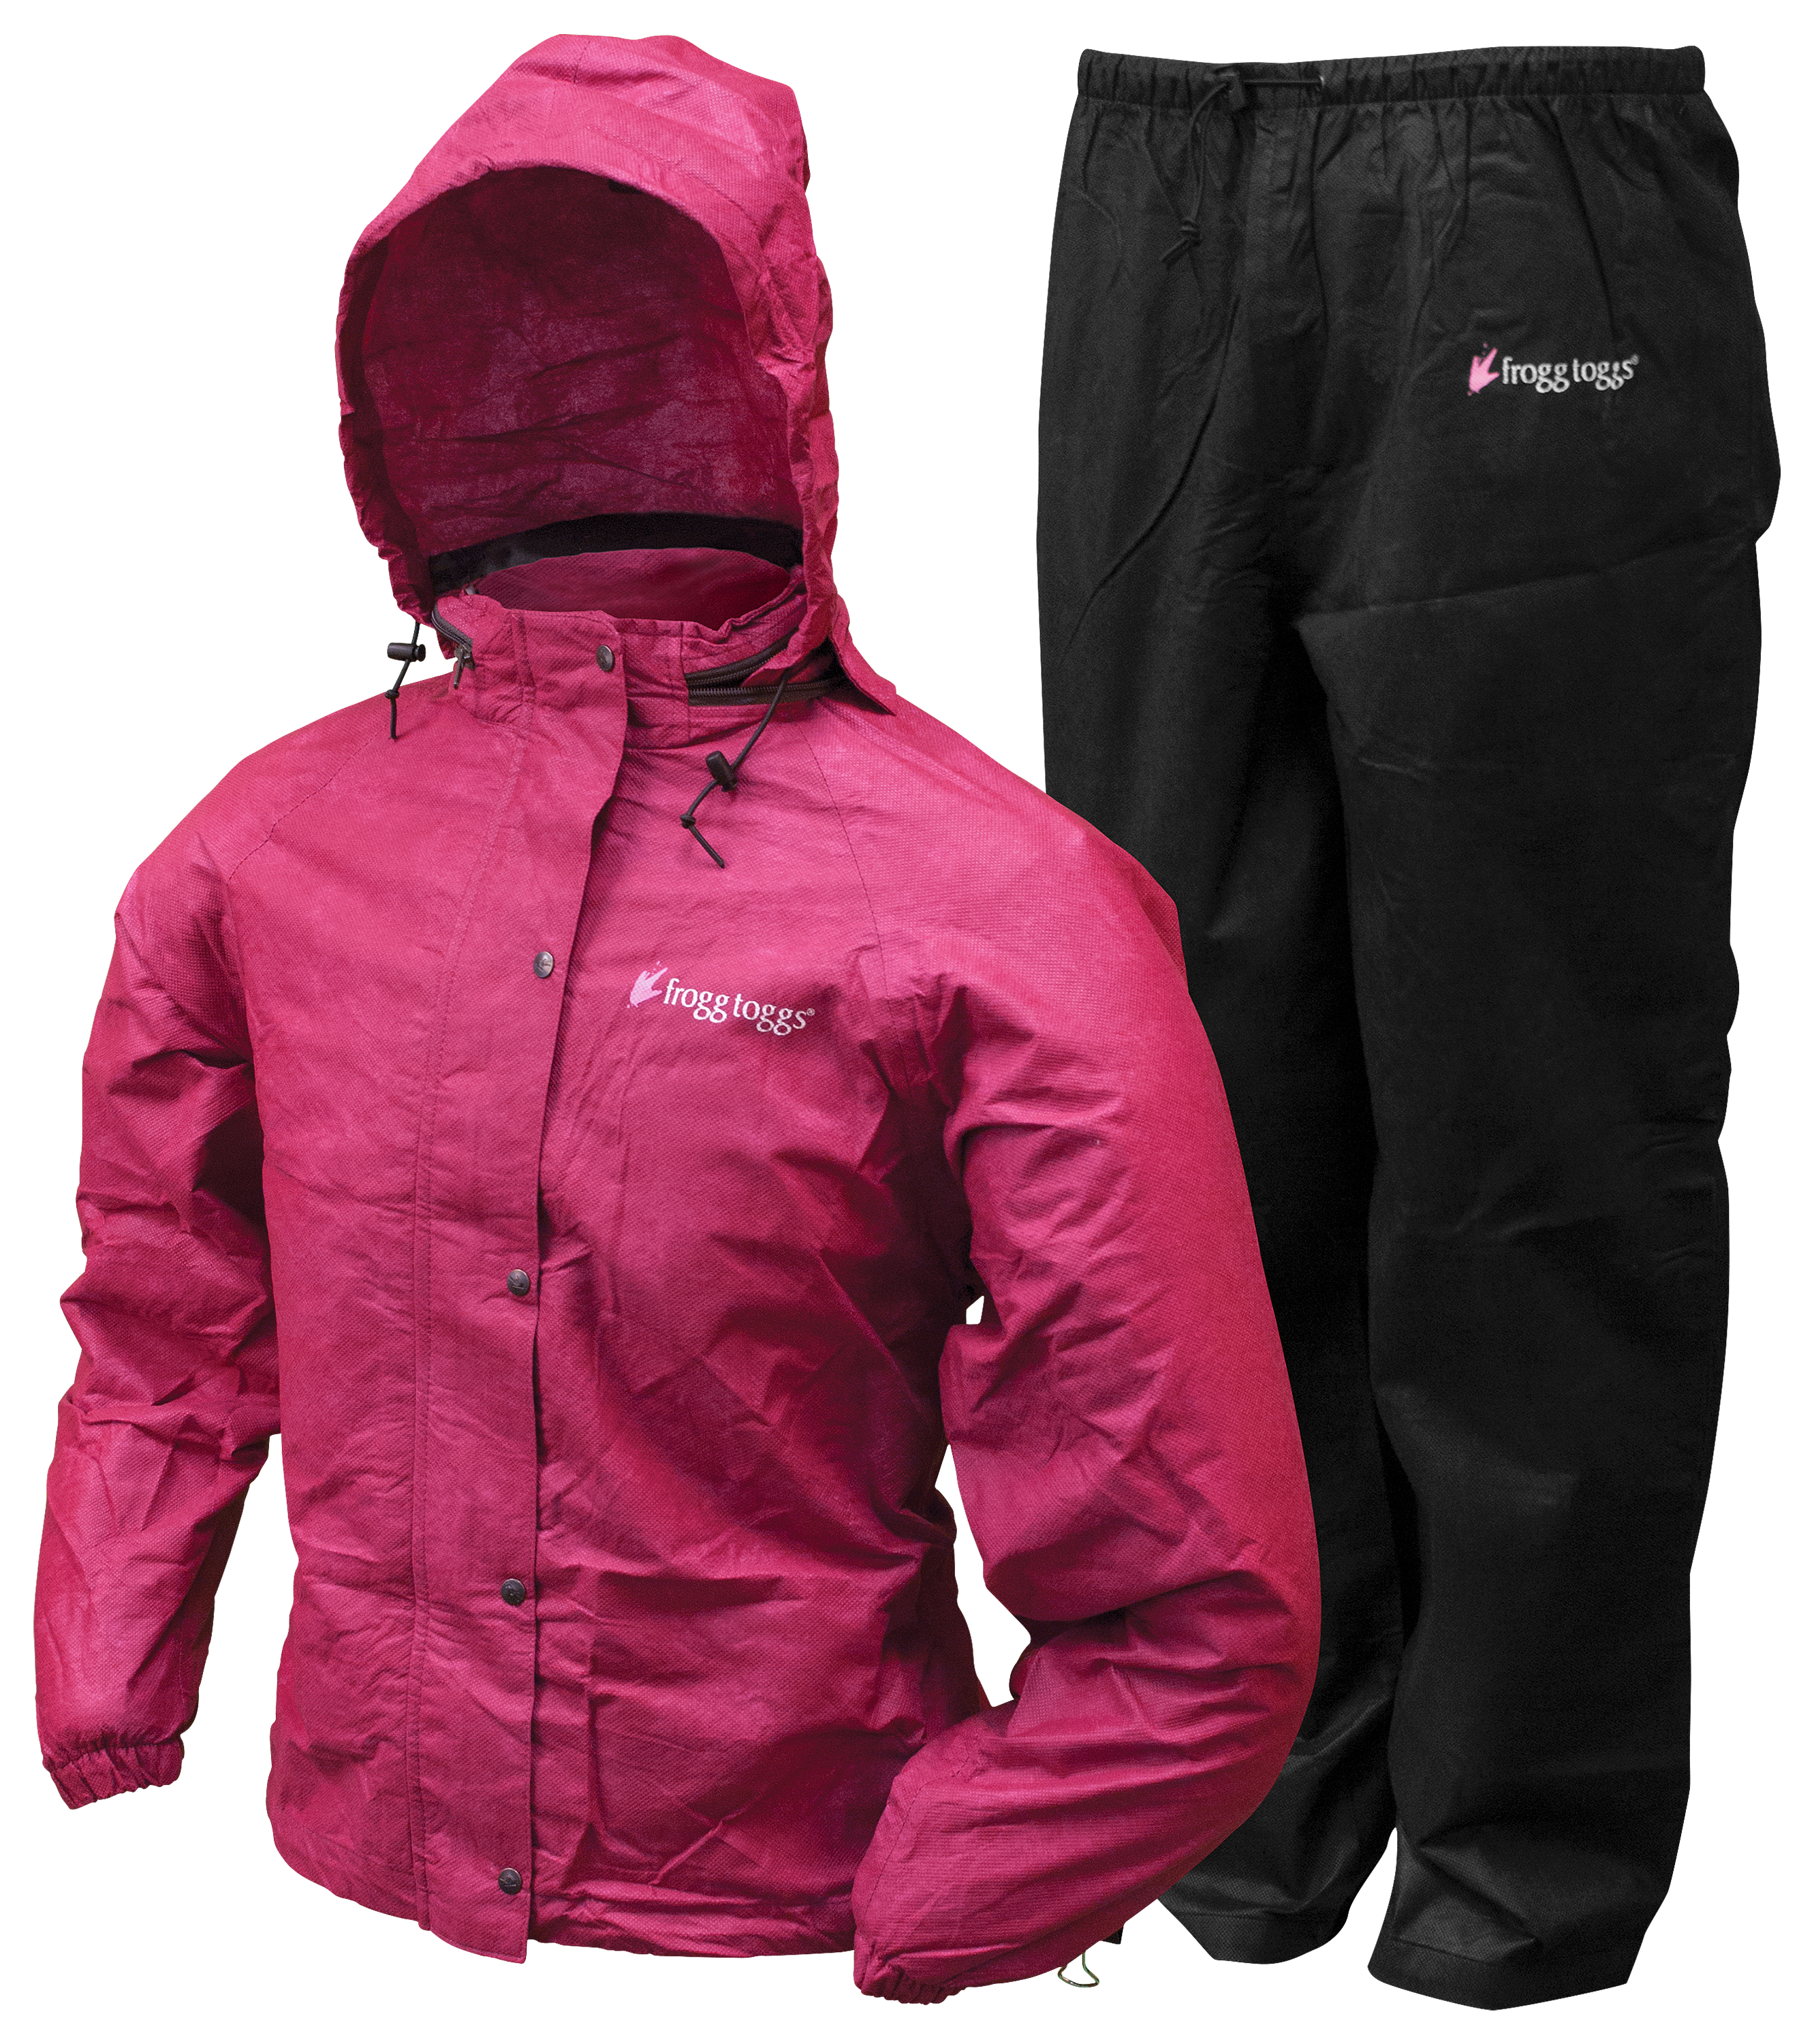 frogg toggs All-Purpose Rain Suit for Ladies